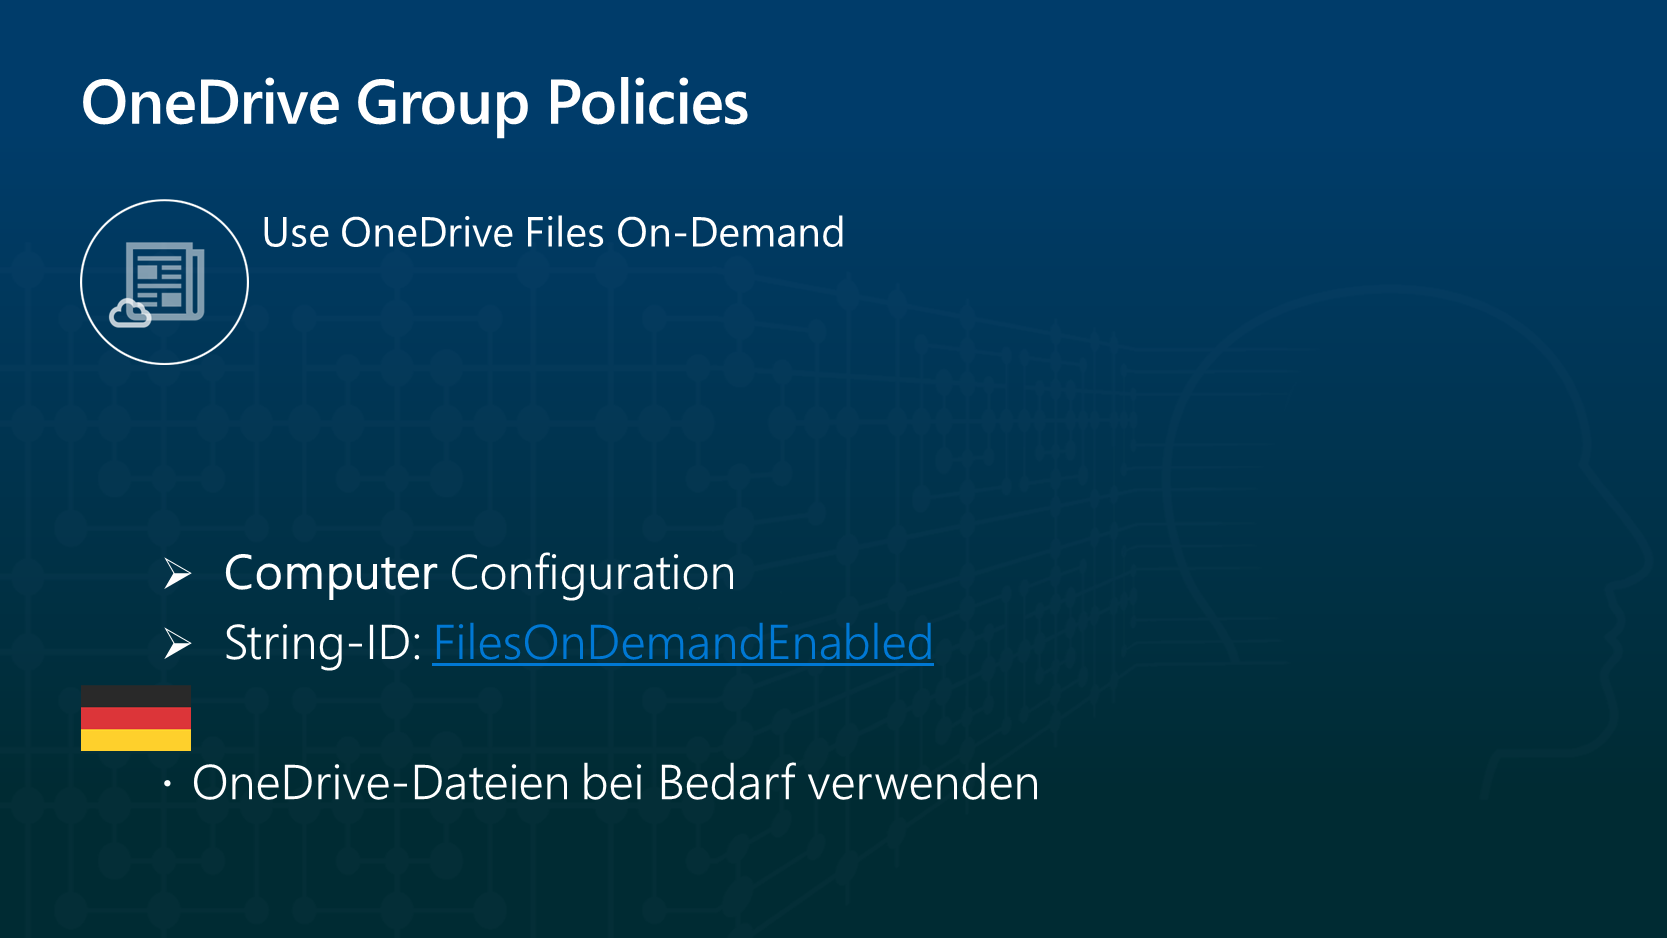 The image shows an icon for the group policy Use OneDrive files on demand and the corresponding string ID: FilesOnDemandEnabled in the computer configuration.